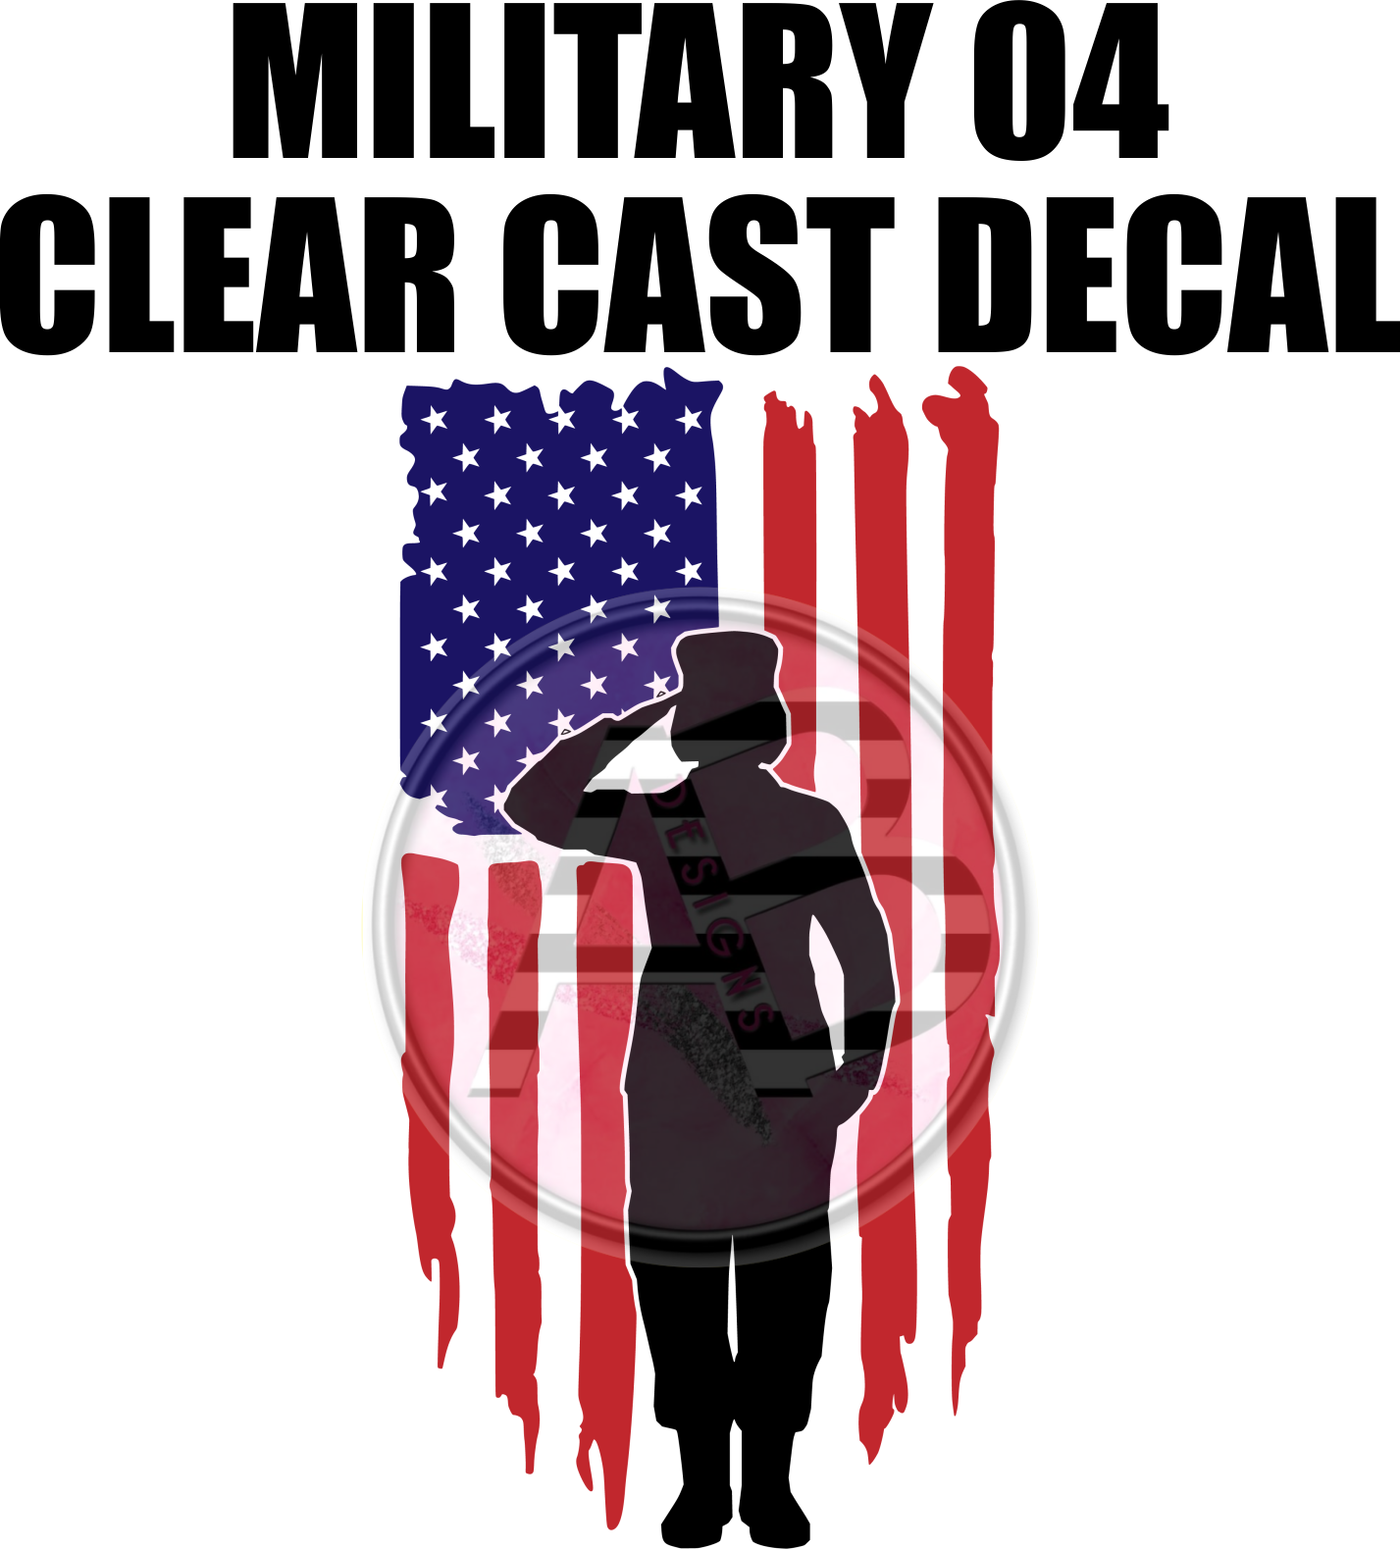 Military 04 - Clear Cast Decal